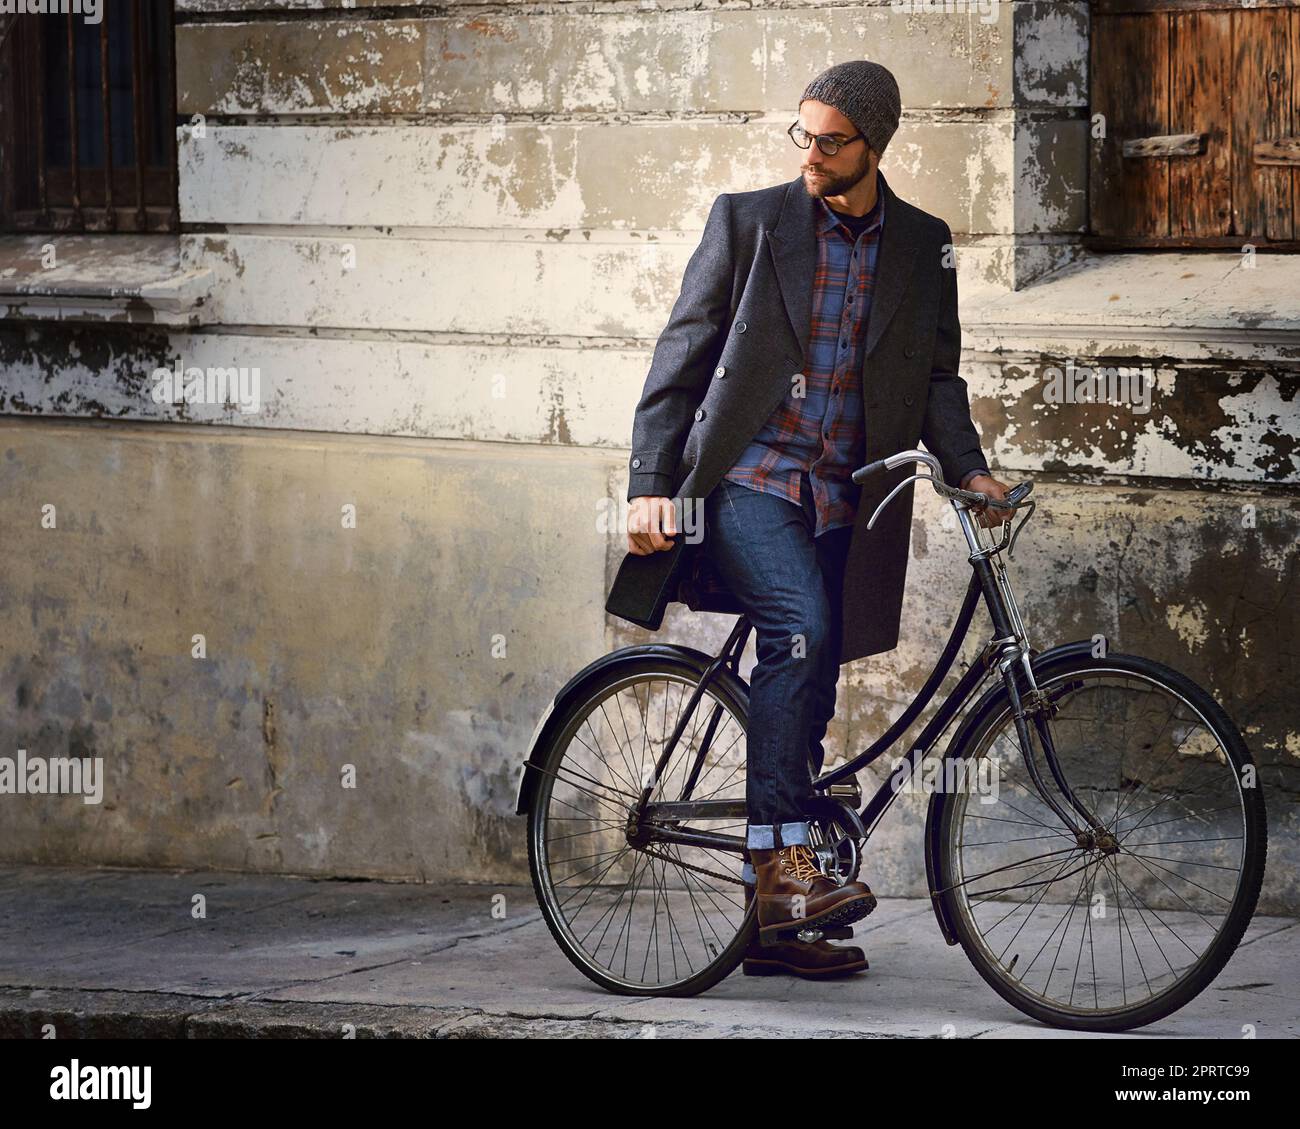 Traveling with style. a handsome young man on his bike wondering around in the city. Stock Photo